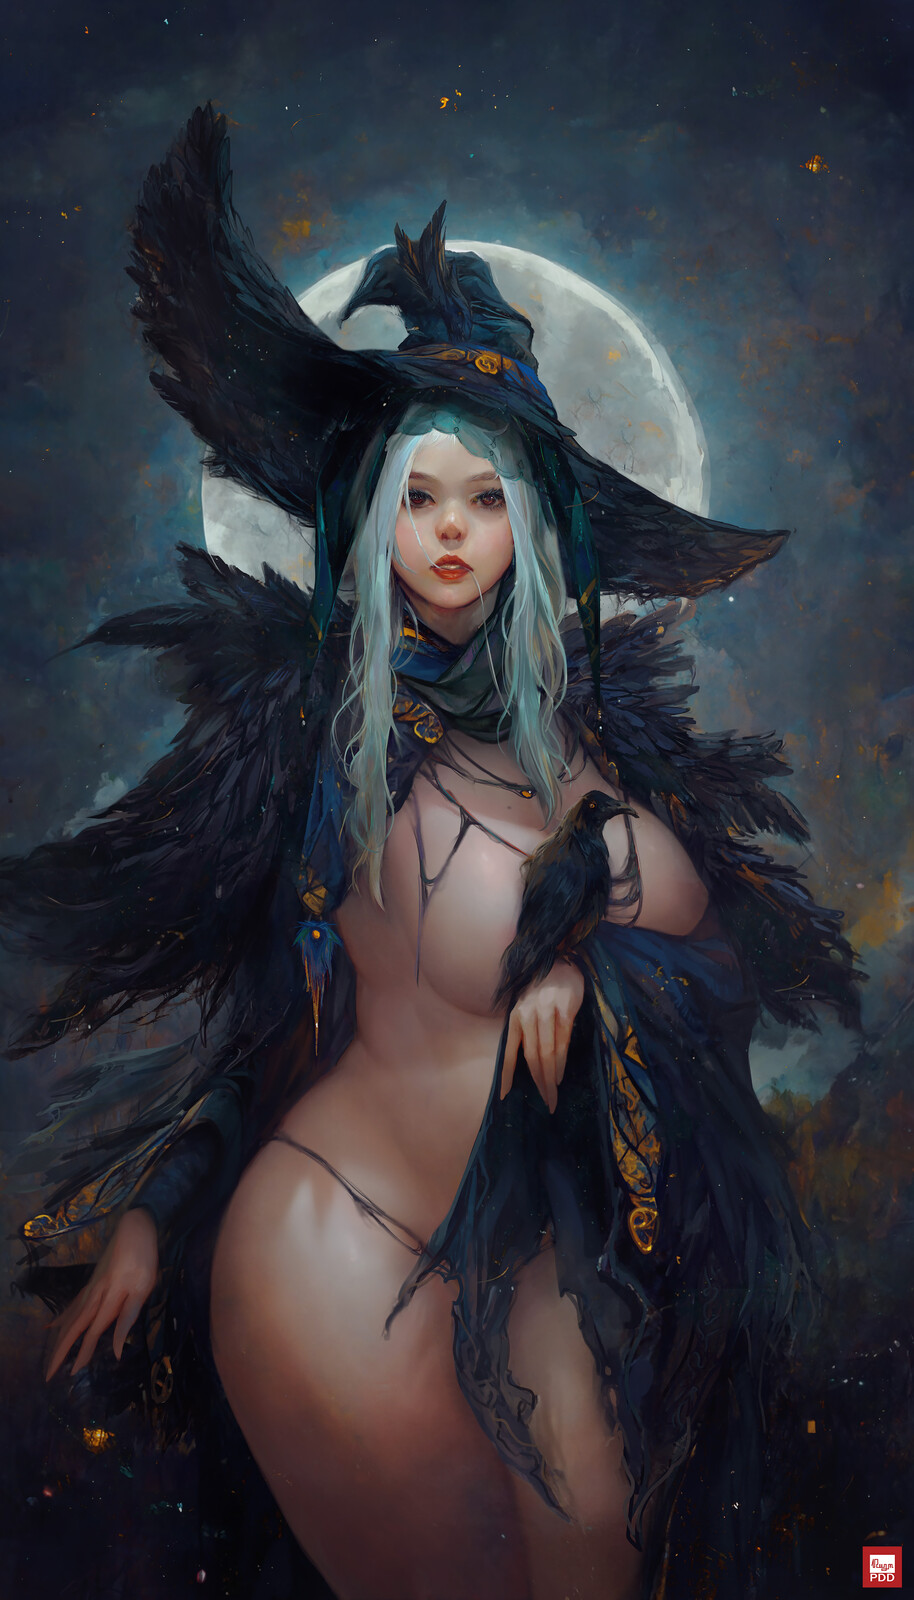 Raven Witch